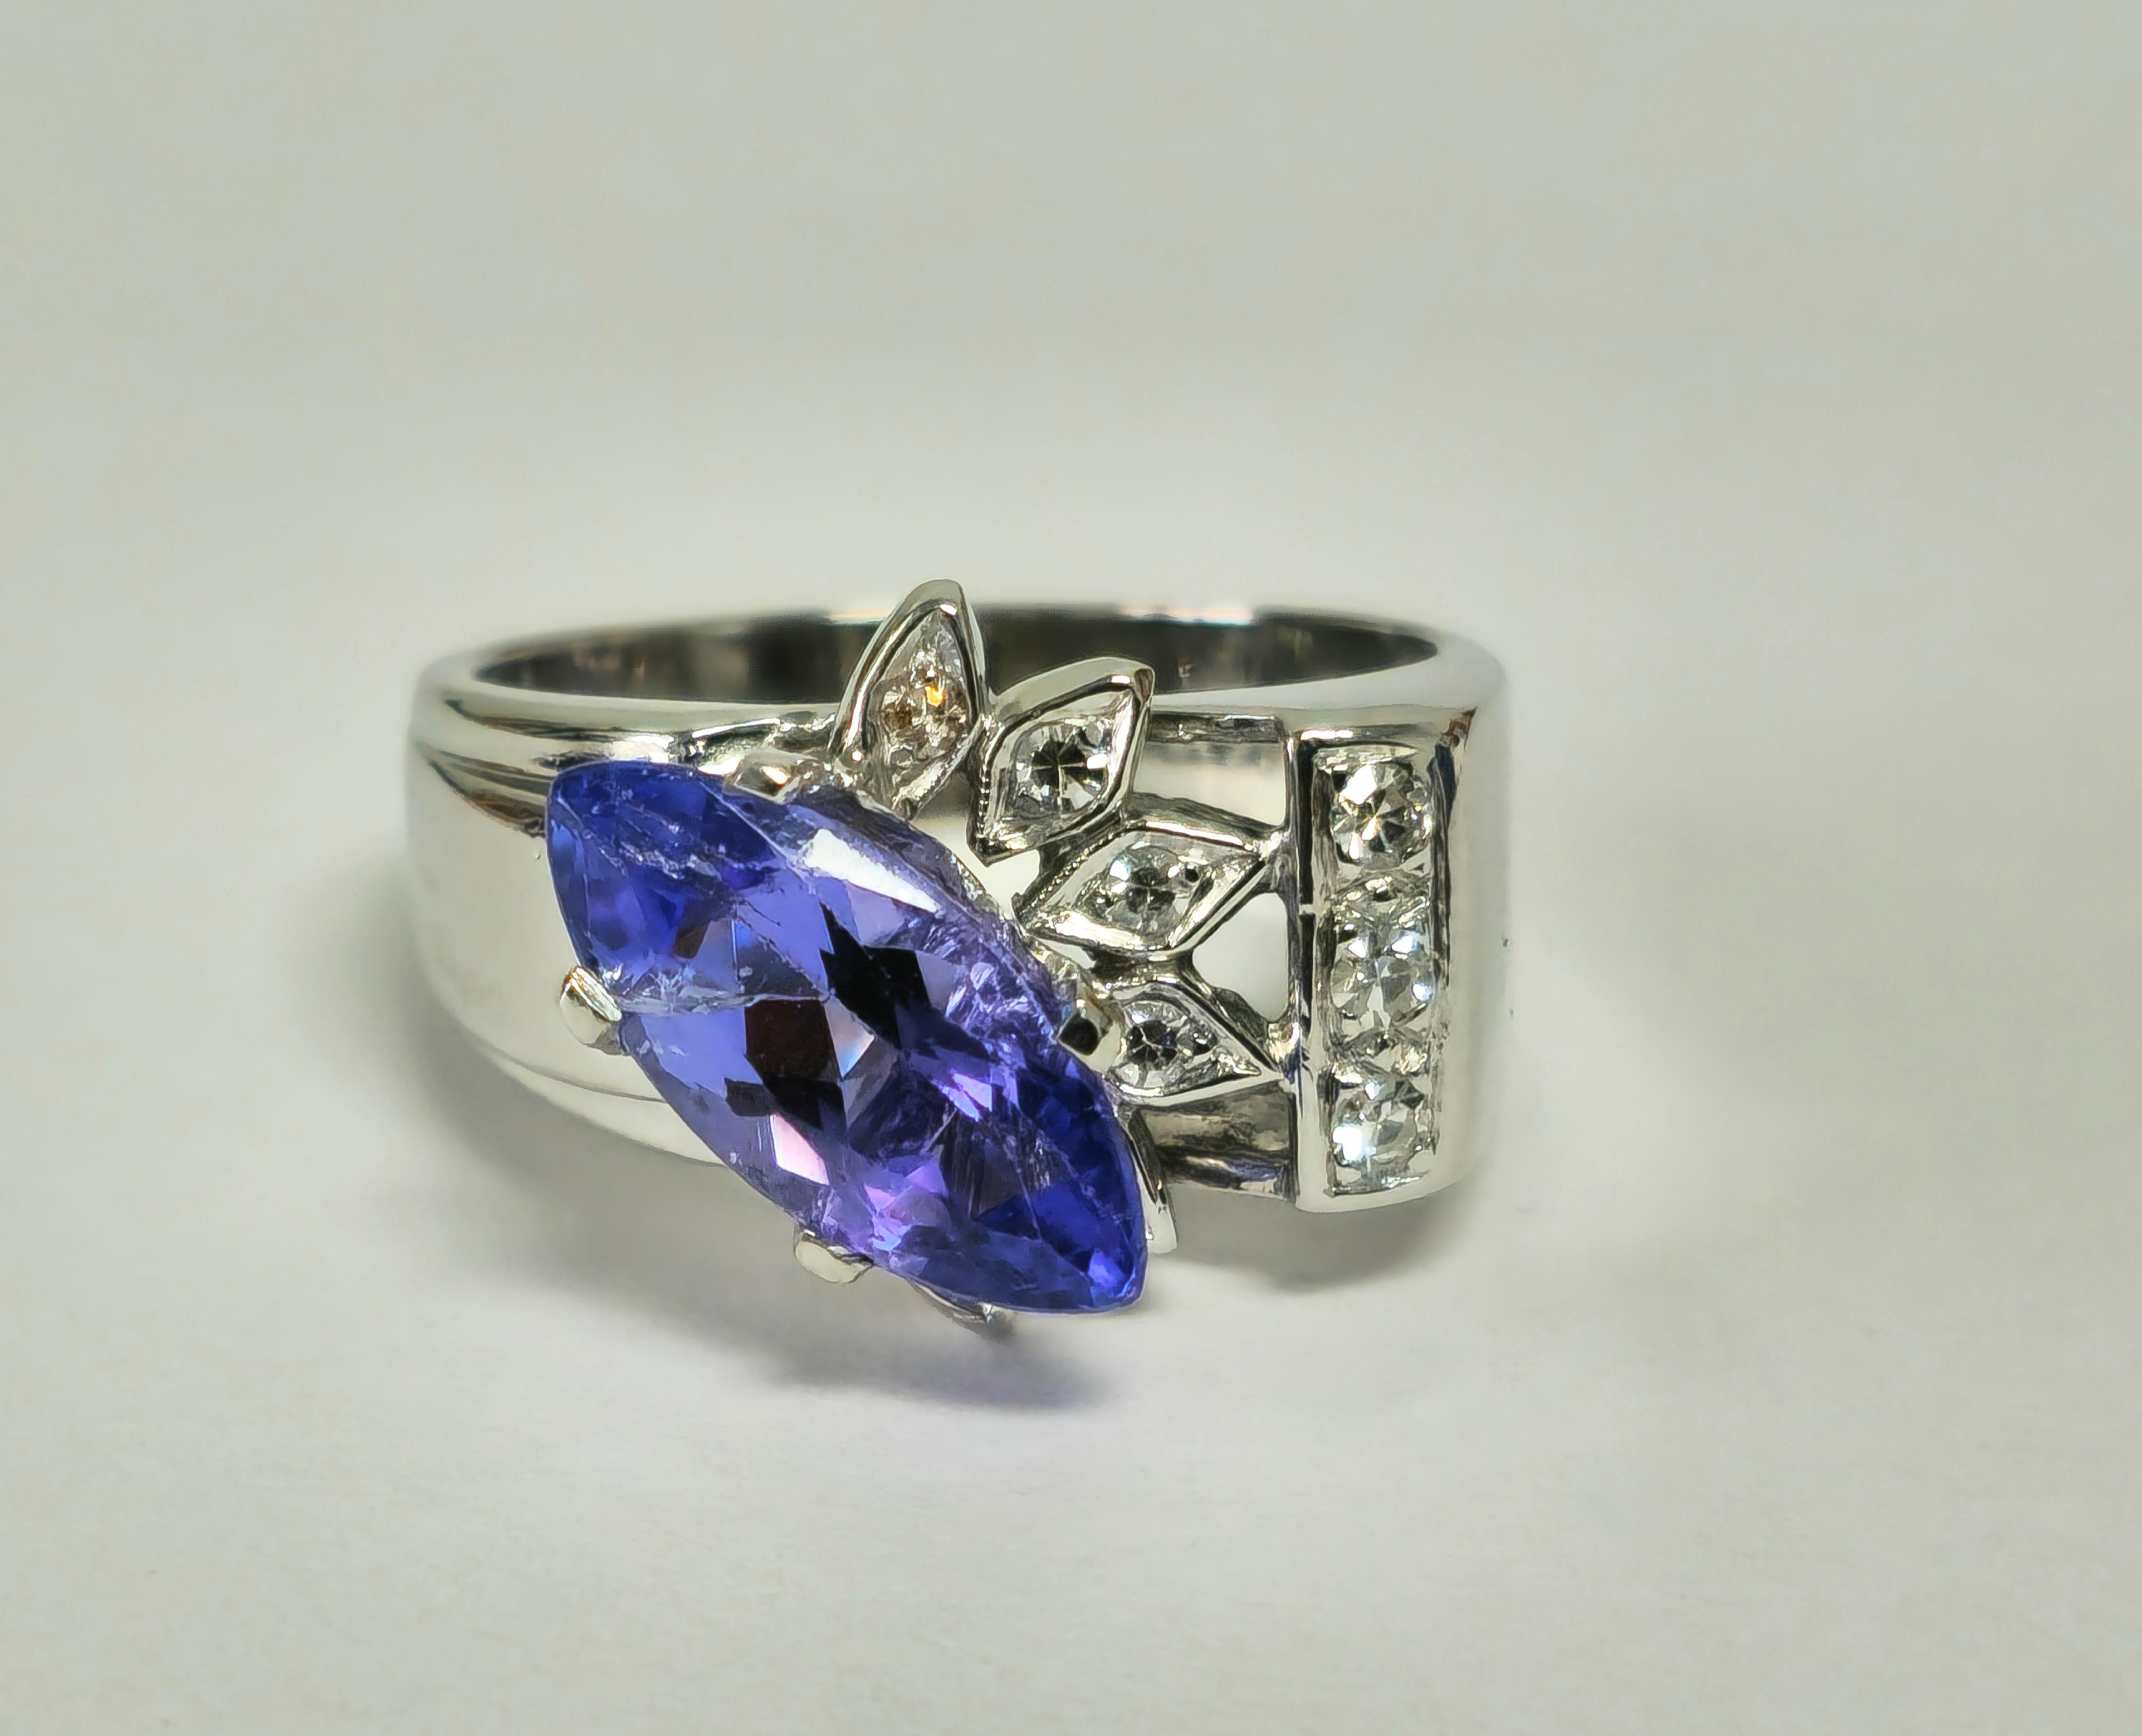 Introducing this exquisite vintage art deco cocktail ring for her, crafted from 14k white gold and adorned with a stunning 2.07 carat marquise-cut tanzanite, showcasing its natural earth-mined beauty. Accentuating the centerpiece are 0.18 carats of